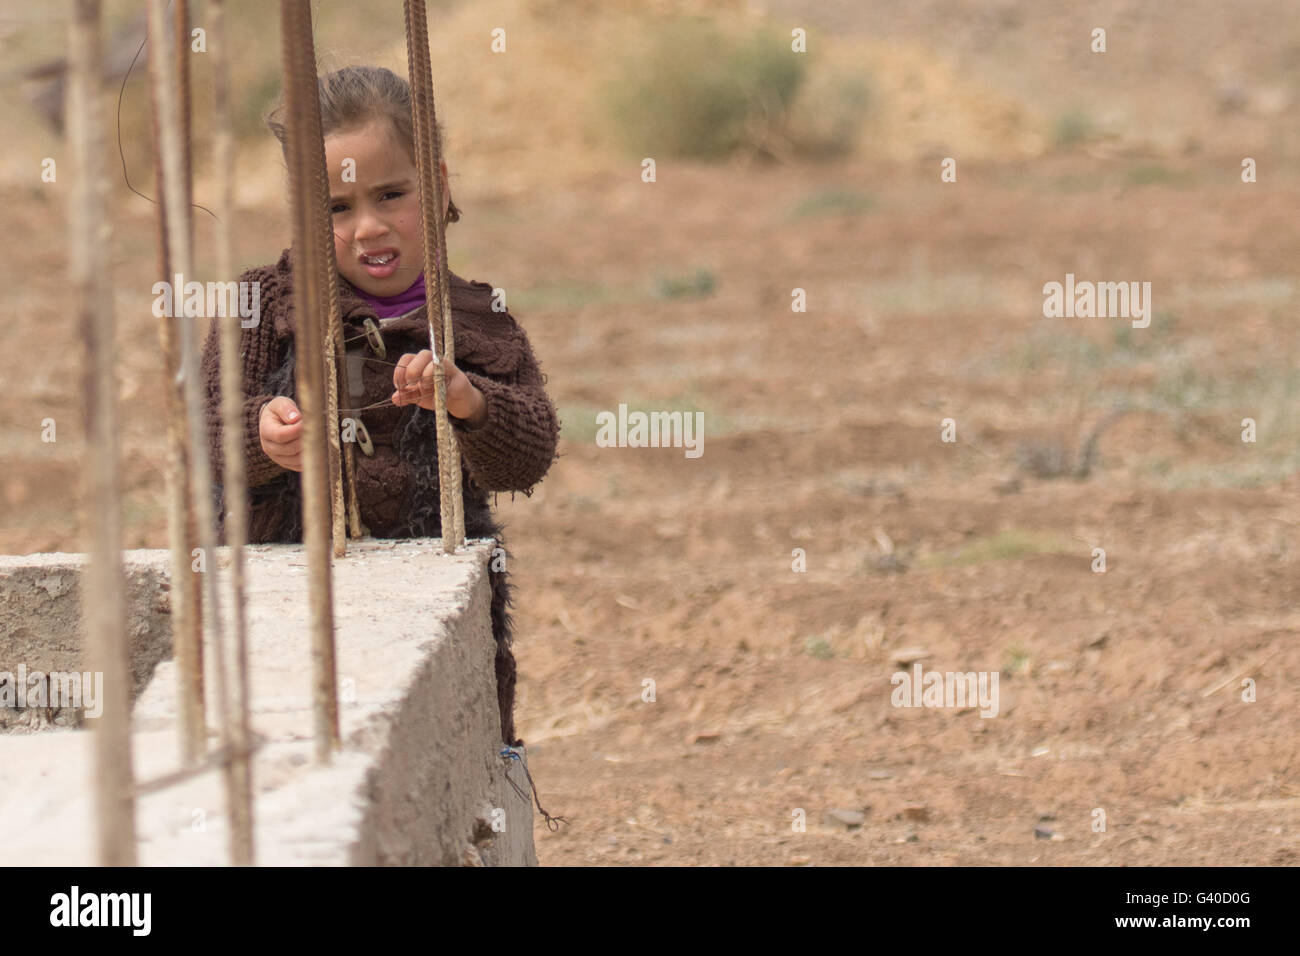 Moroccan girl peeping through bars on concrete post, looking curious. Stock Photo